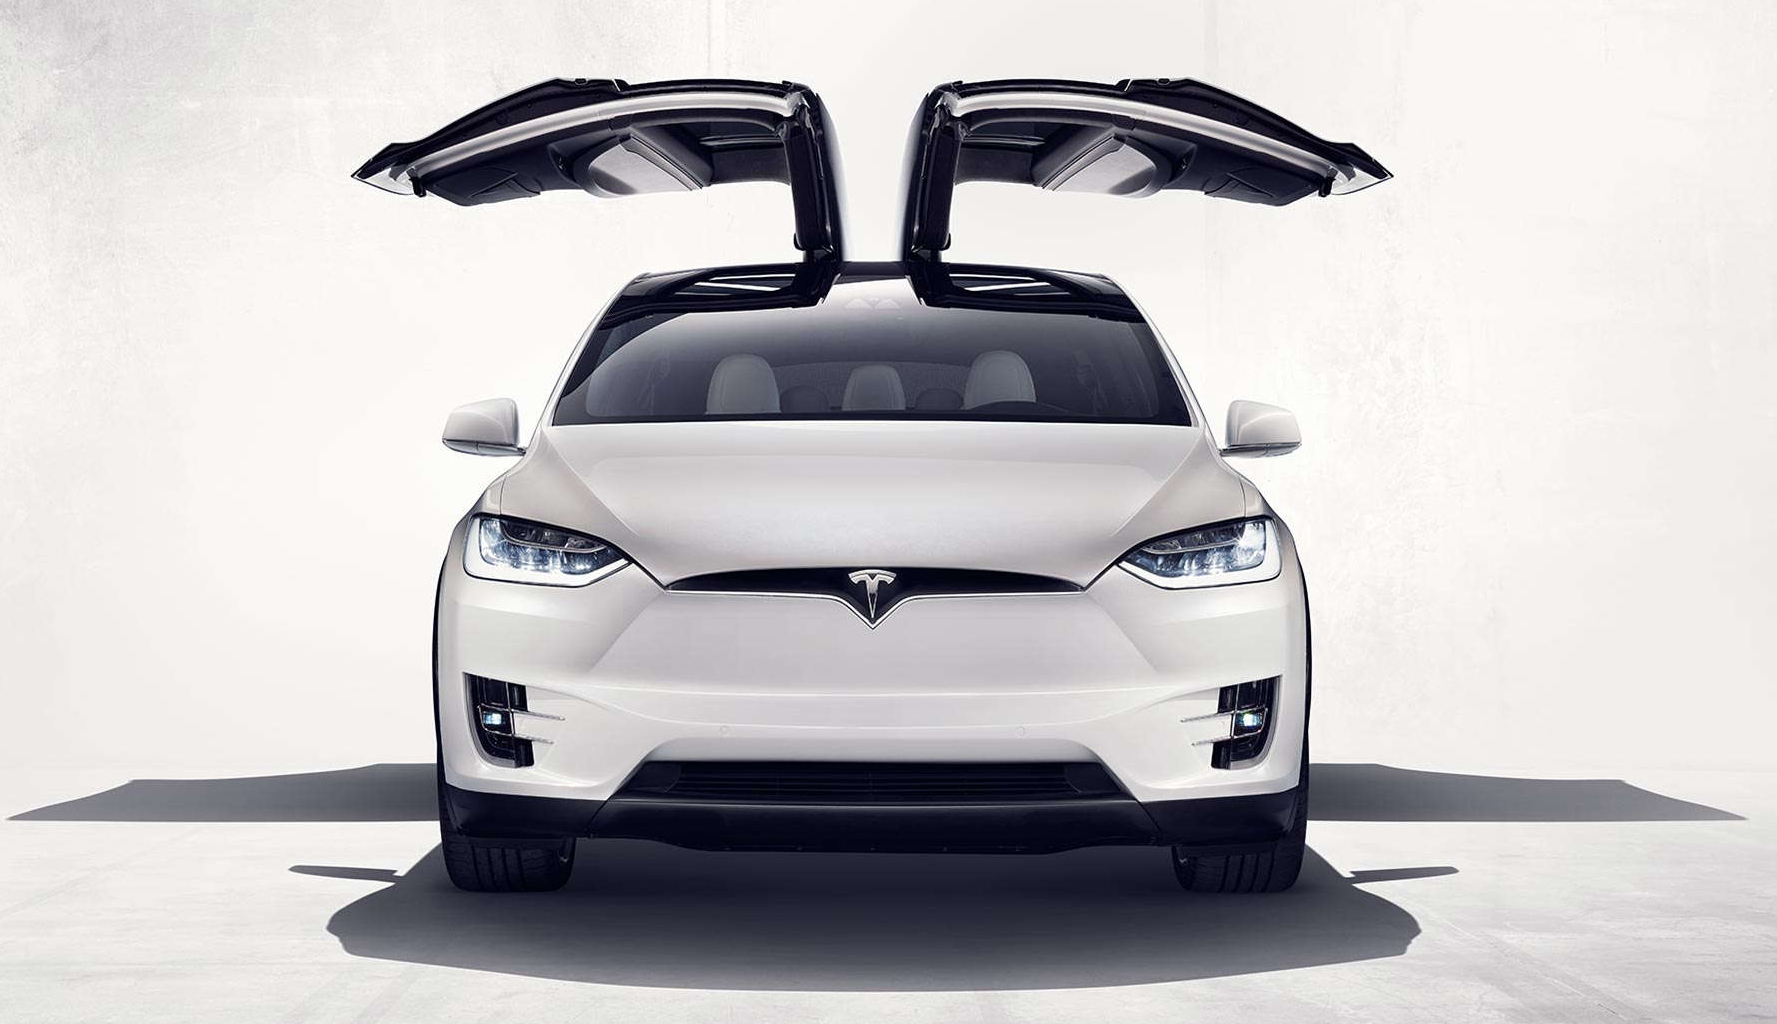 Tesloop offers city to city ride-sharing service in a Tesla